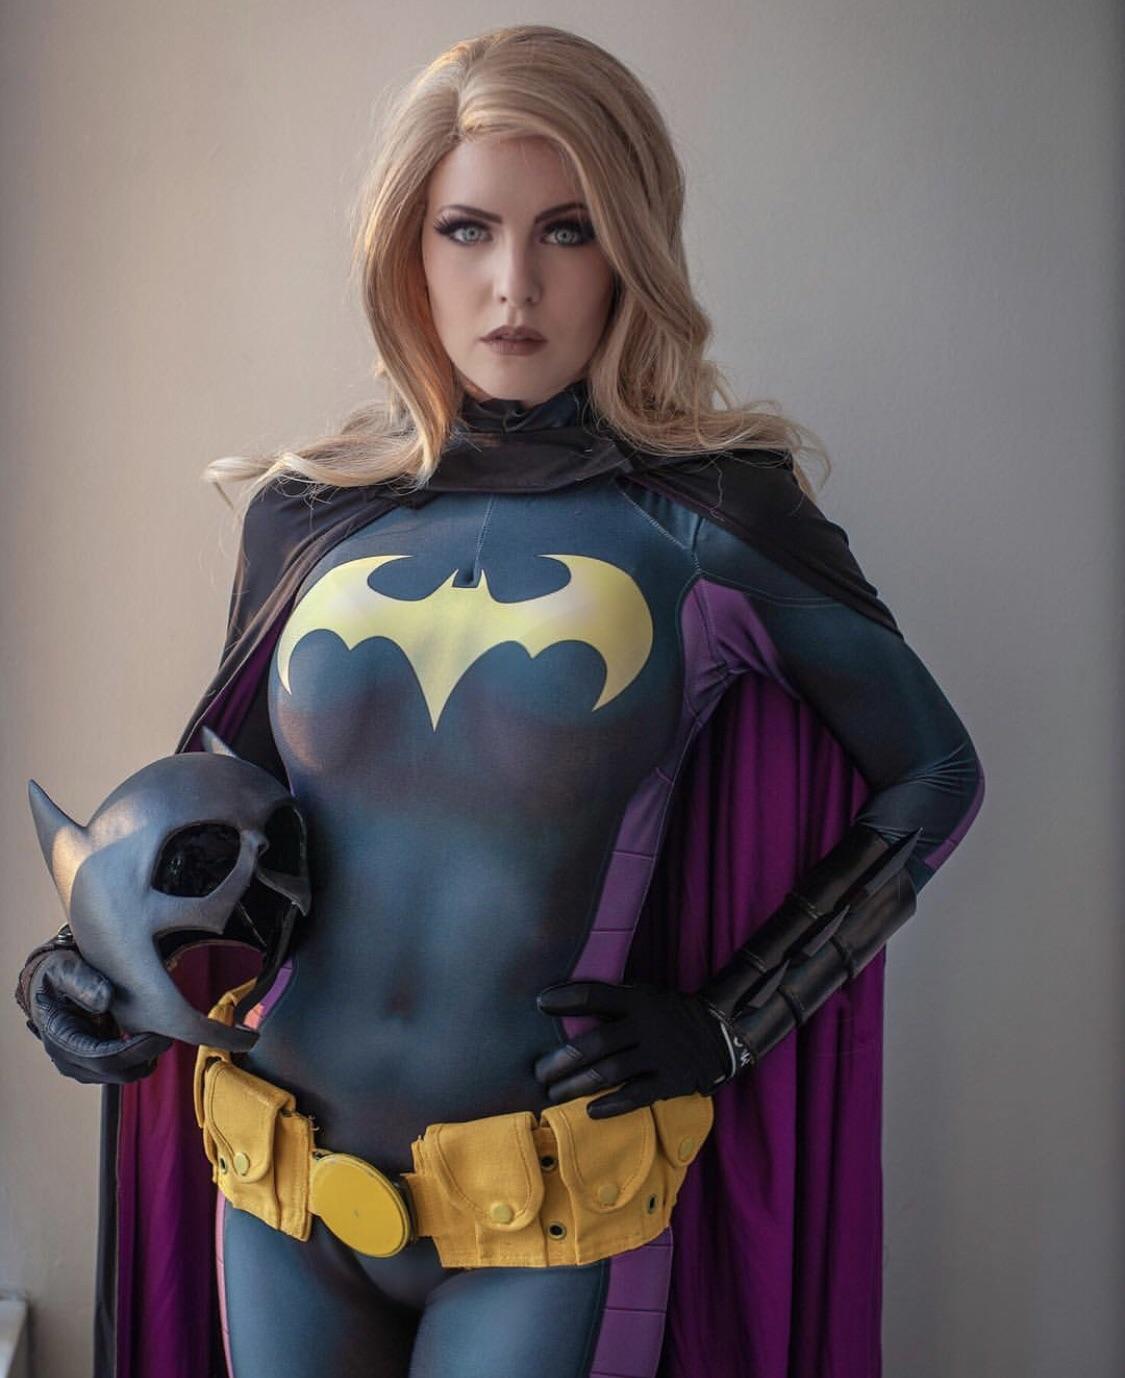 Cute Cosplay Babe Batgirl By Maid Of Migh